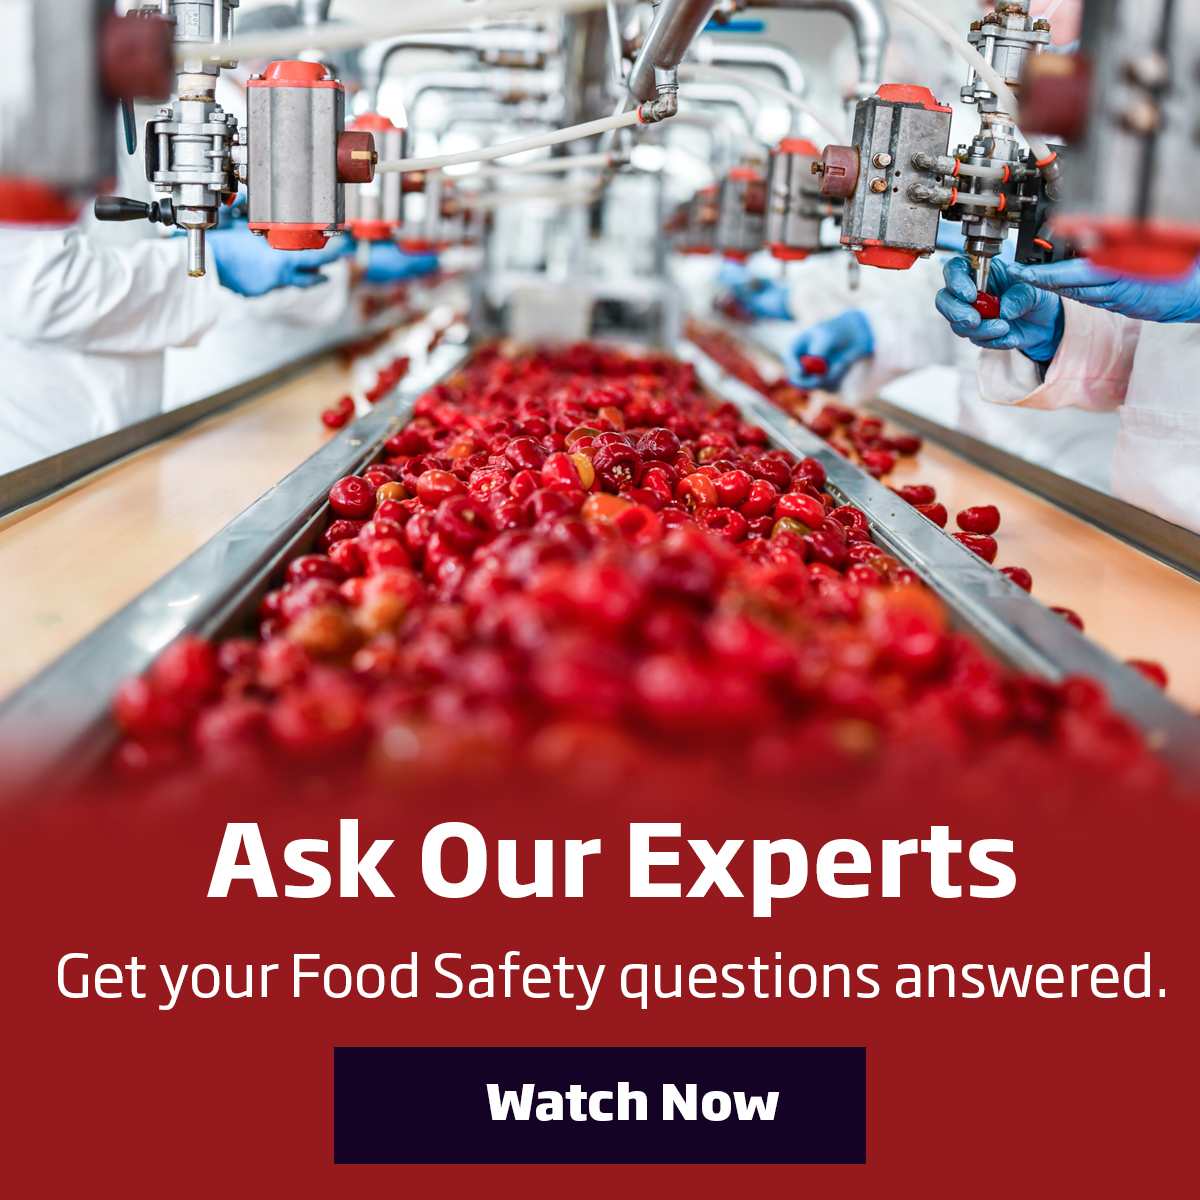 Food-Experts-Webinar-Q3-2022-1200by1200-WATCH-NOW_B